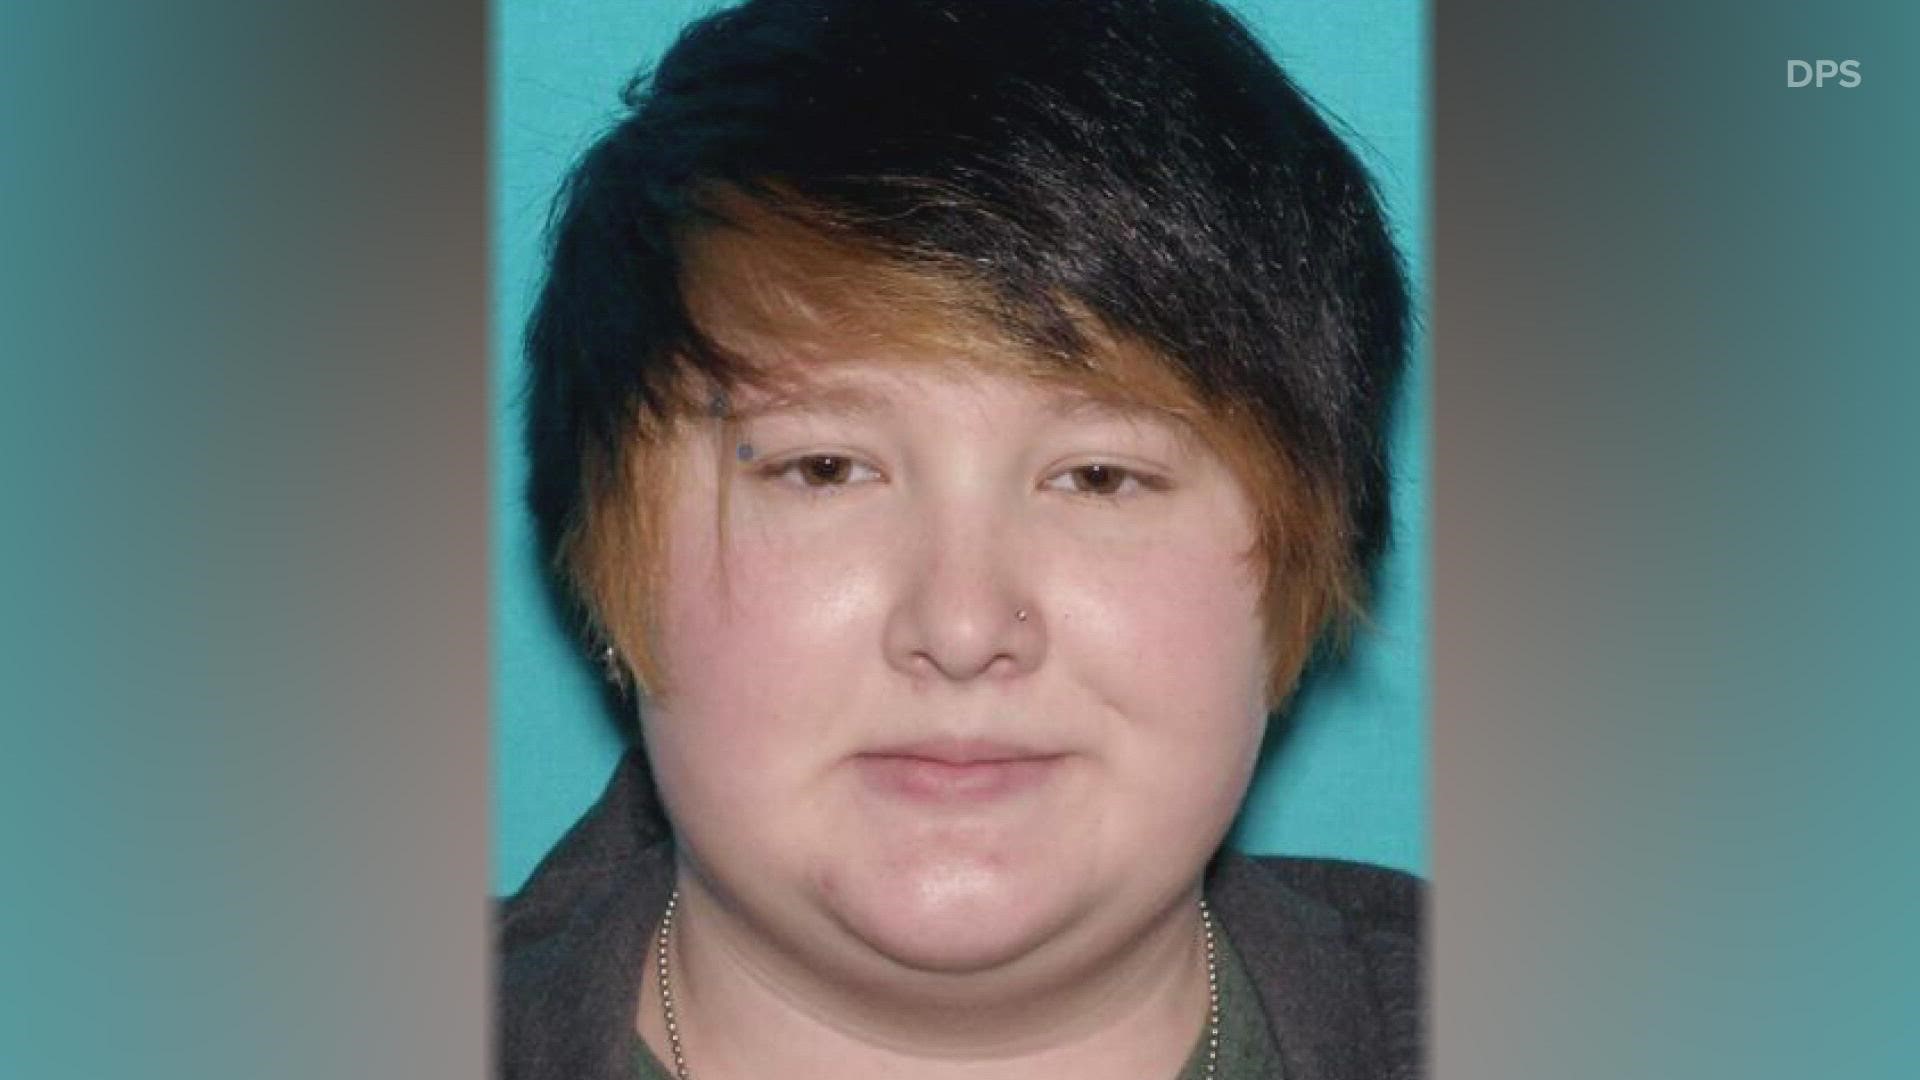 The Penobscot County Sheriff's Office said Wednesday Mason Dorcy was found near Ohio Street just days after they were reported missing.